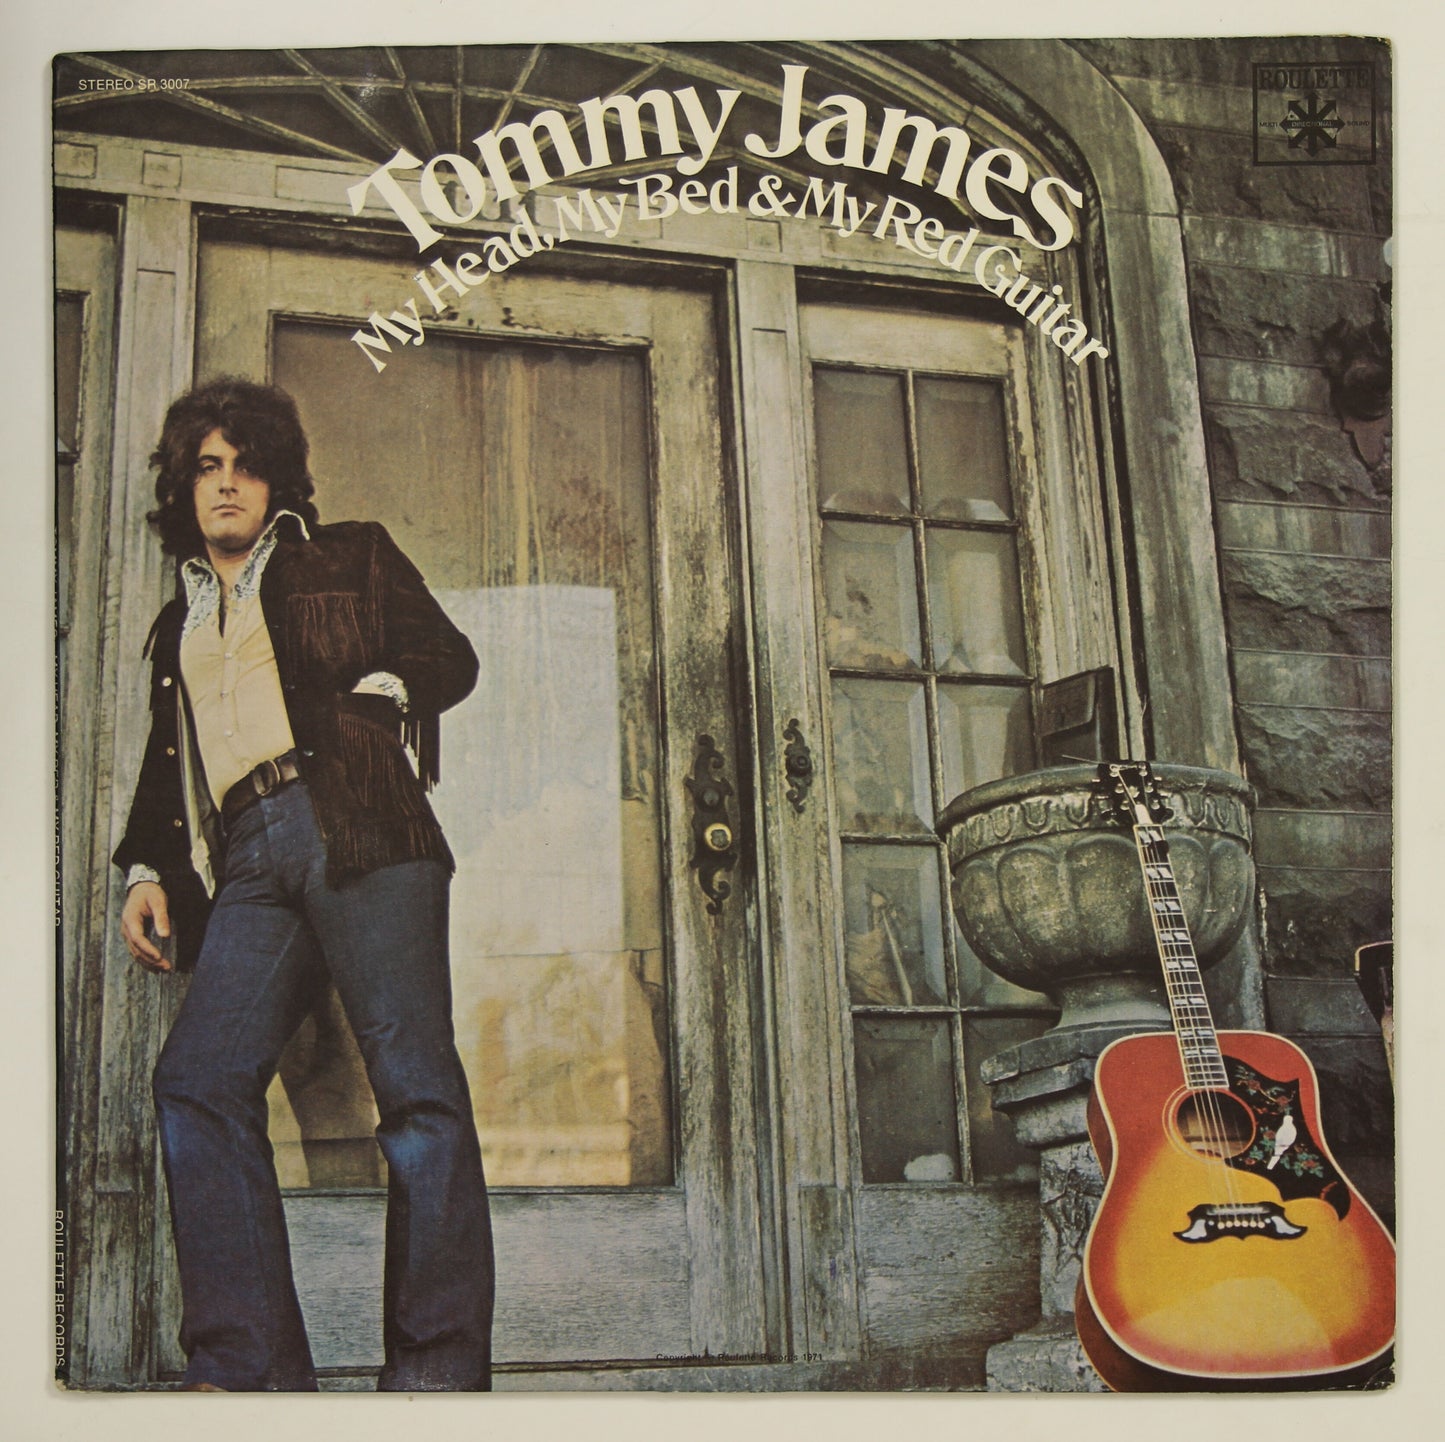 TOMMY JAMES / MY HEAD, MY BED & MY RED GUITAR